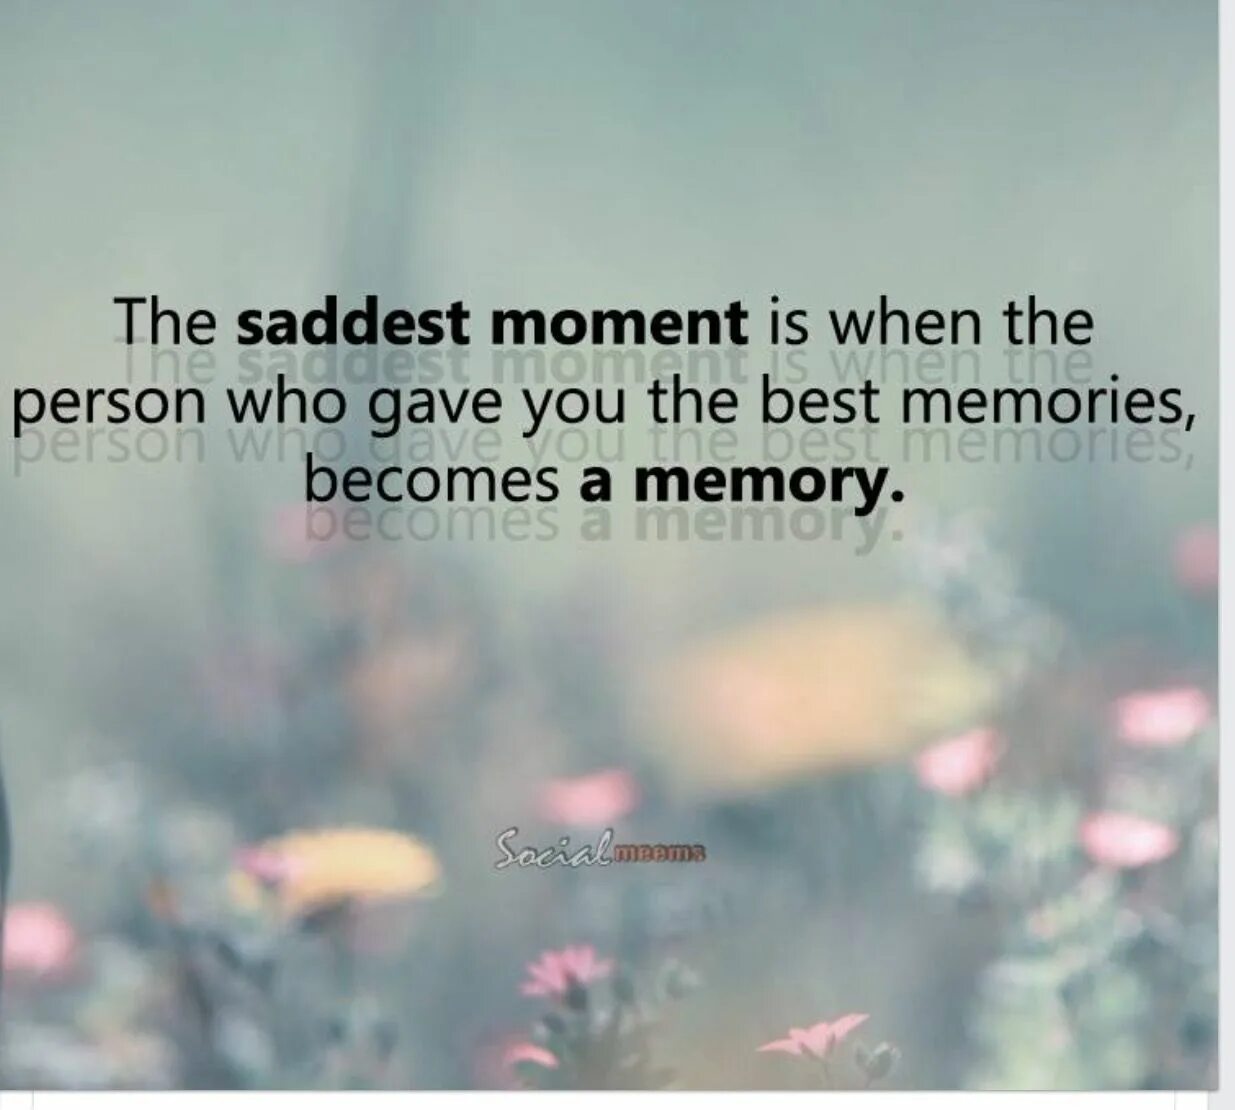 My best memory. Best Memories картинка. Quotes when the person who gave you the best Memories. Quote person who gave the best Memories. Quotes it's Sad when the person who gave you the best Memories.